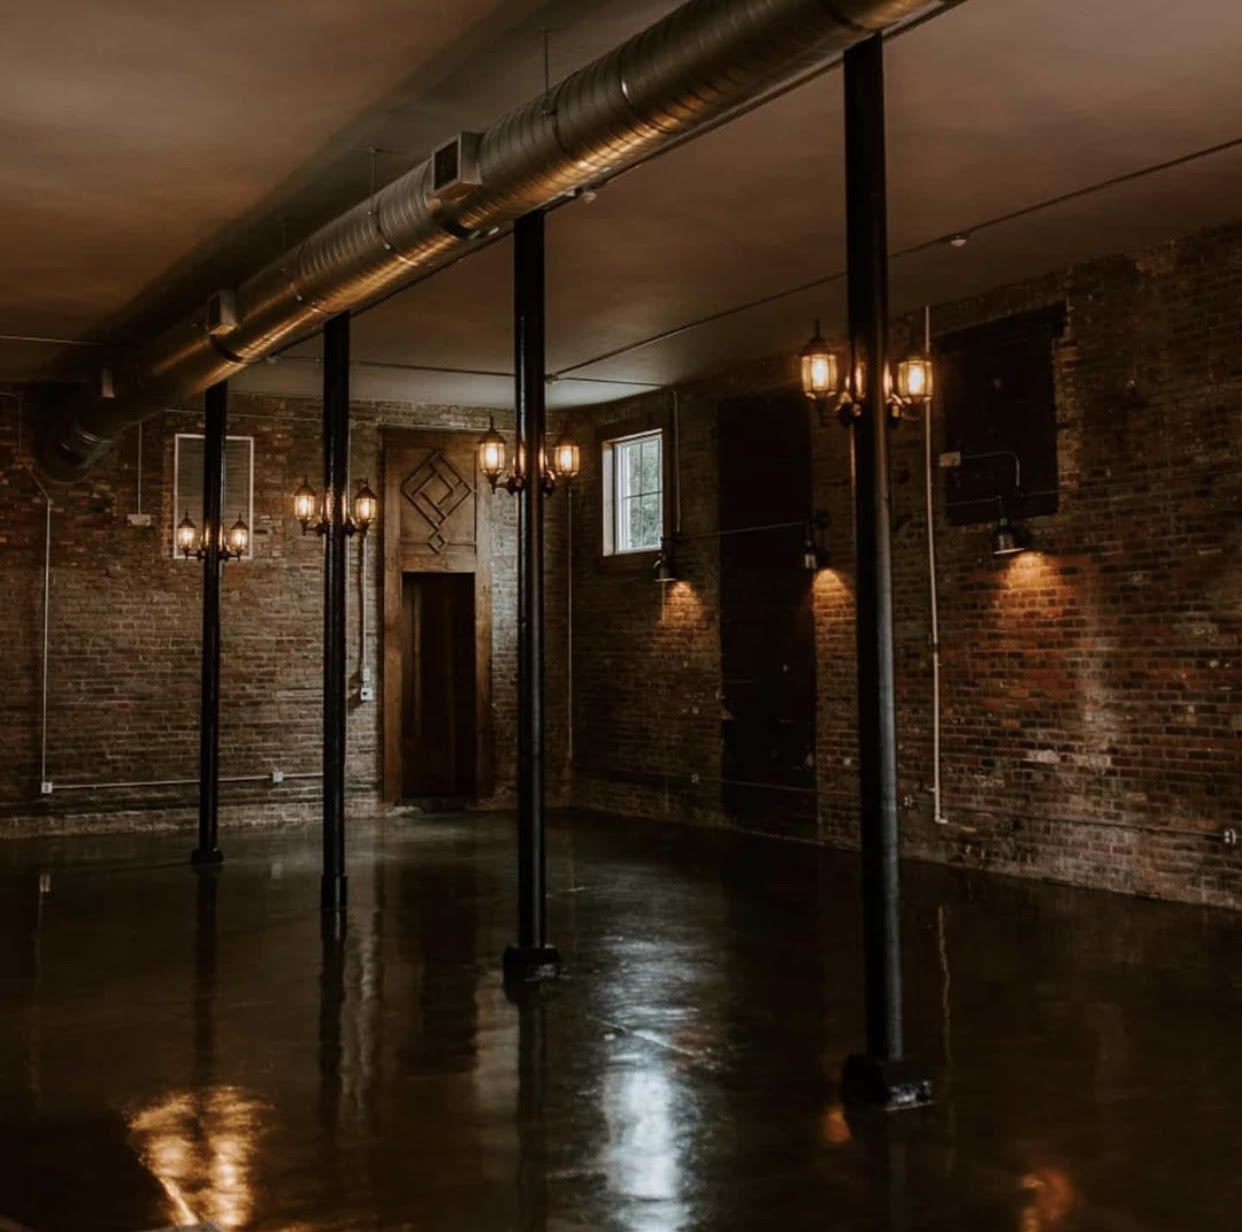 Large room with glossy concrete floors and lighting